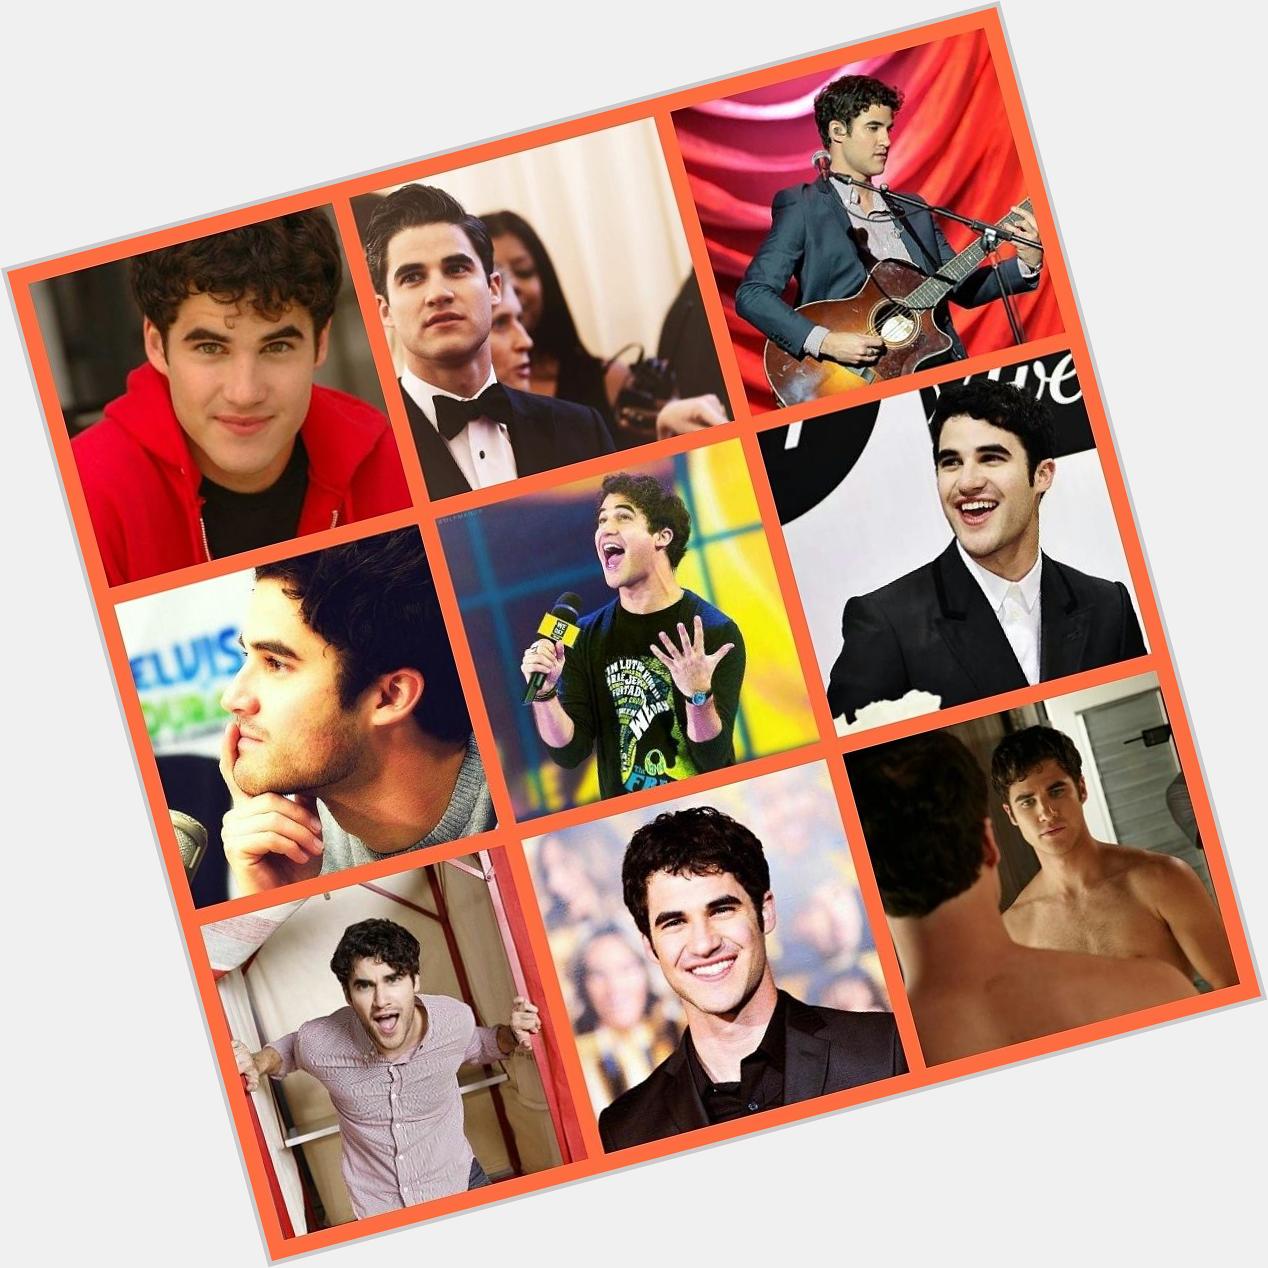 HAPPY 28TH BIRTHDAY DARREN CRISS! THANK YOU FOR EVERYTHING! I WILL ALWAYS LOVE YOU  